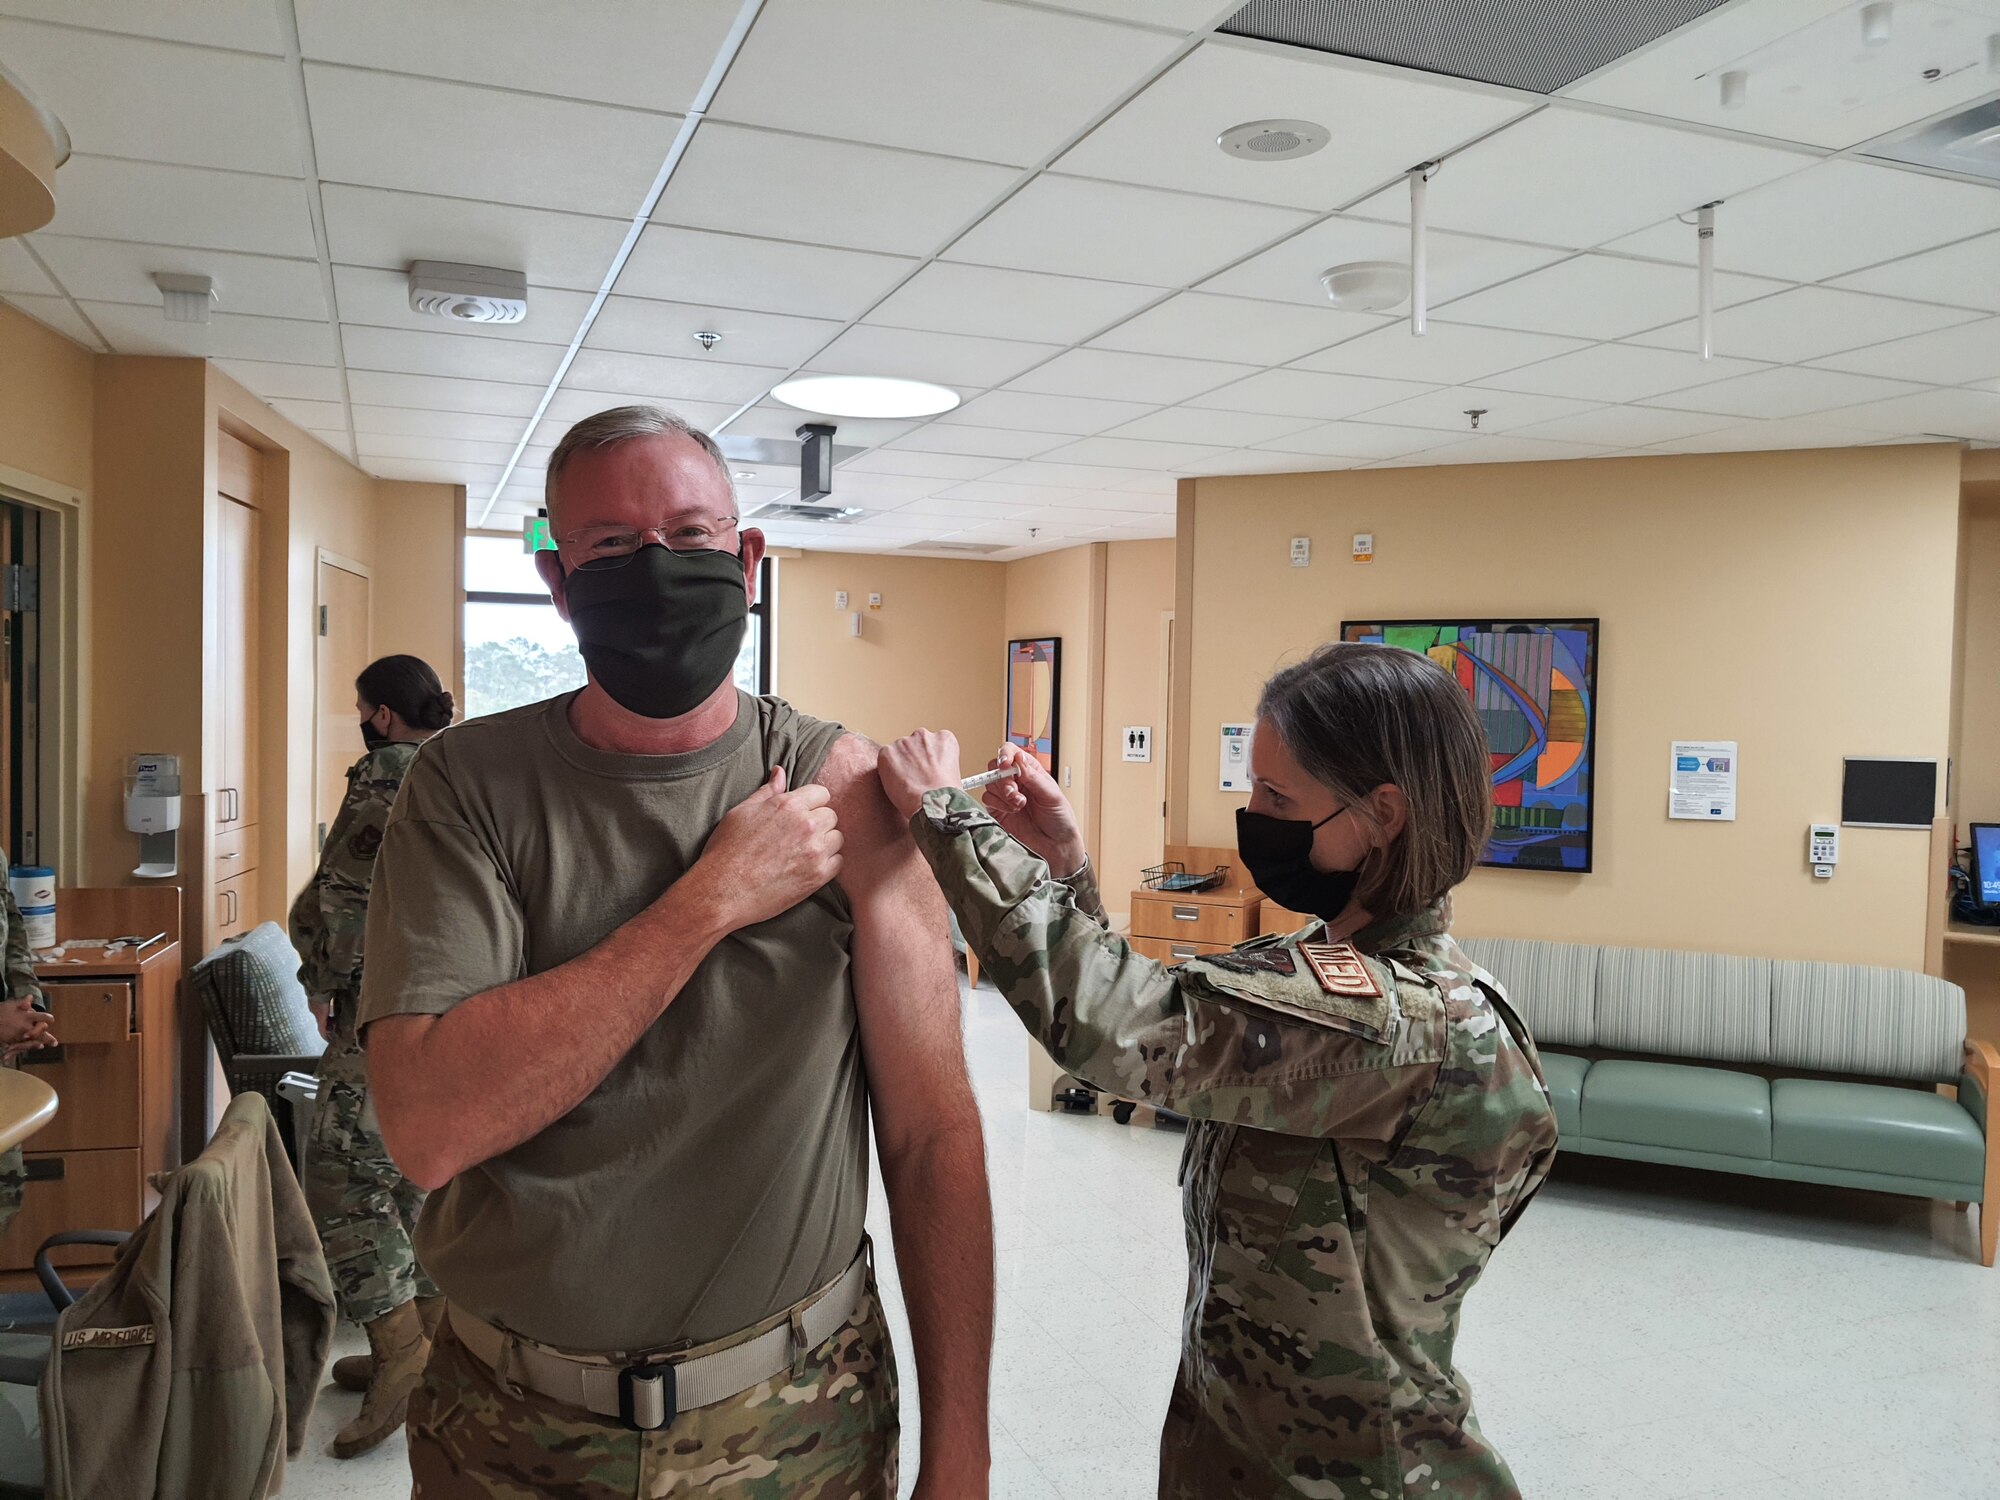 Col. Jeffrey Van Dootingh, 403rd Wing commander, receives his first dose of the COVID vaccine, Feb. 6, 2021 from Lt. Col. Sabrina Hawkins, 403rd Aeromedical Staging Squadron nurse. The 403rd Wing received the vaccine for the February Unit Training Assembly and the 403rd ASTS began administering the vaccine to wing members that volunteered to take it, based on a tier system that prioritizes personnel at risk of being exposed daily to receive it first. (U.S. Air Force photo by Master Sgt. Jessica Kendziorek/ Photo permission granted by Col. Jeffrey Van Dootingh)